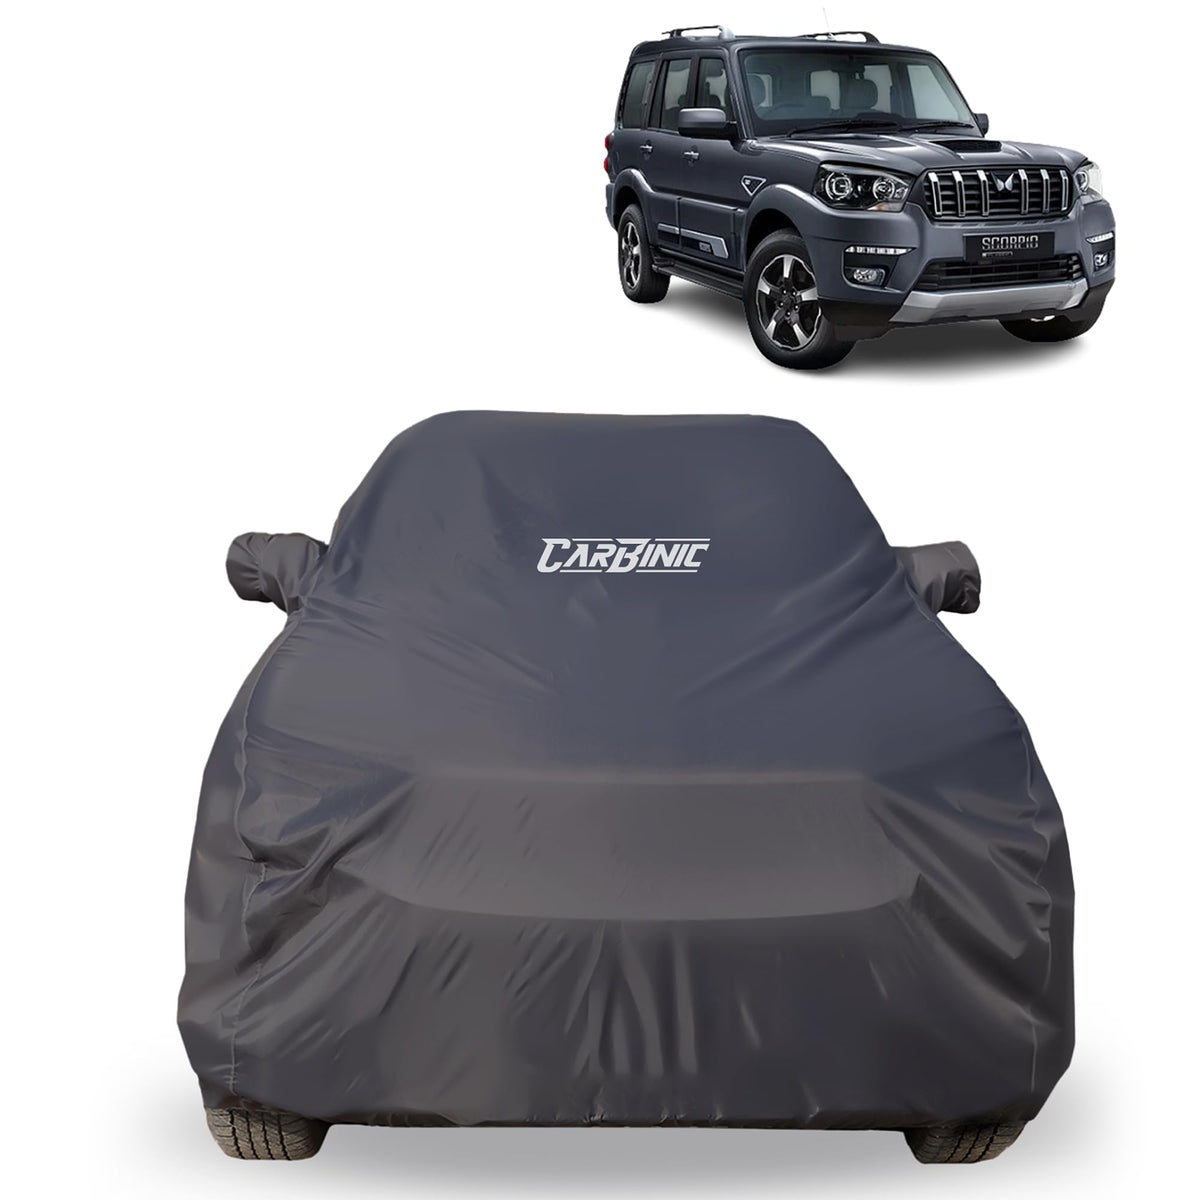 CARBINIC Car Body Cover for Jeep Meridian 2022 | Water Resistant, UV Protection Car Cover | Scratchproof Body Shield | All-Weather Cover | Mirror Pocket & Antenna | Car Accessories Dusk Grey